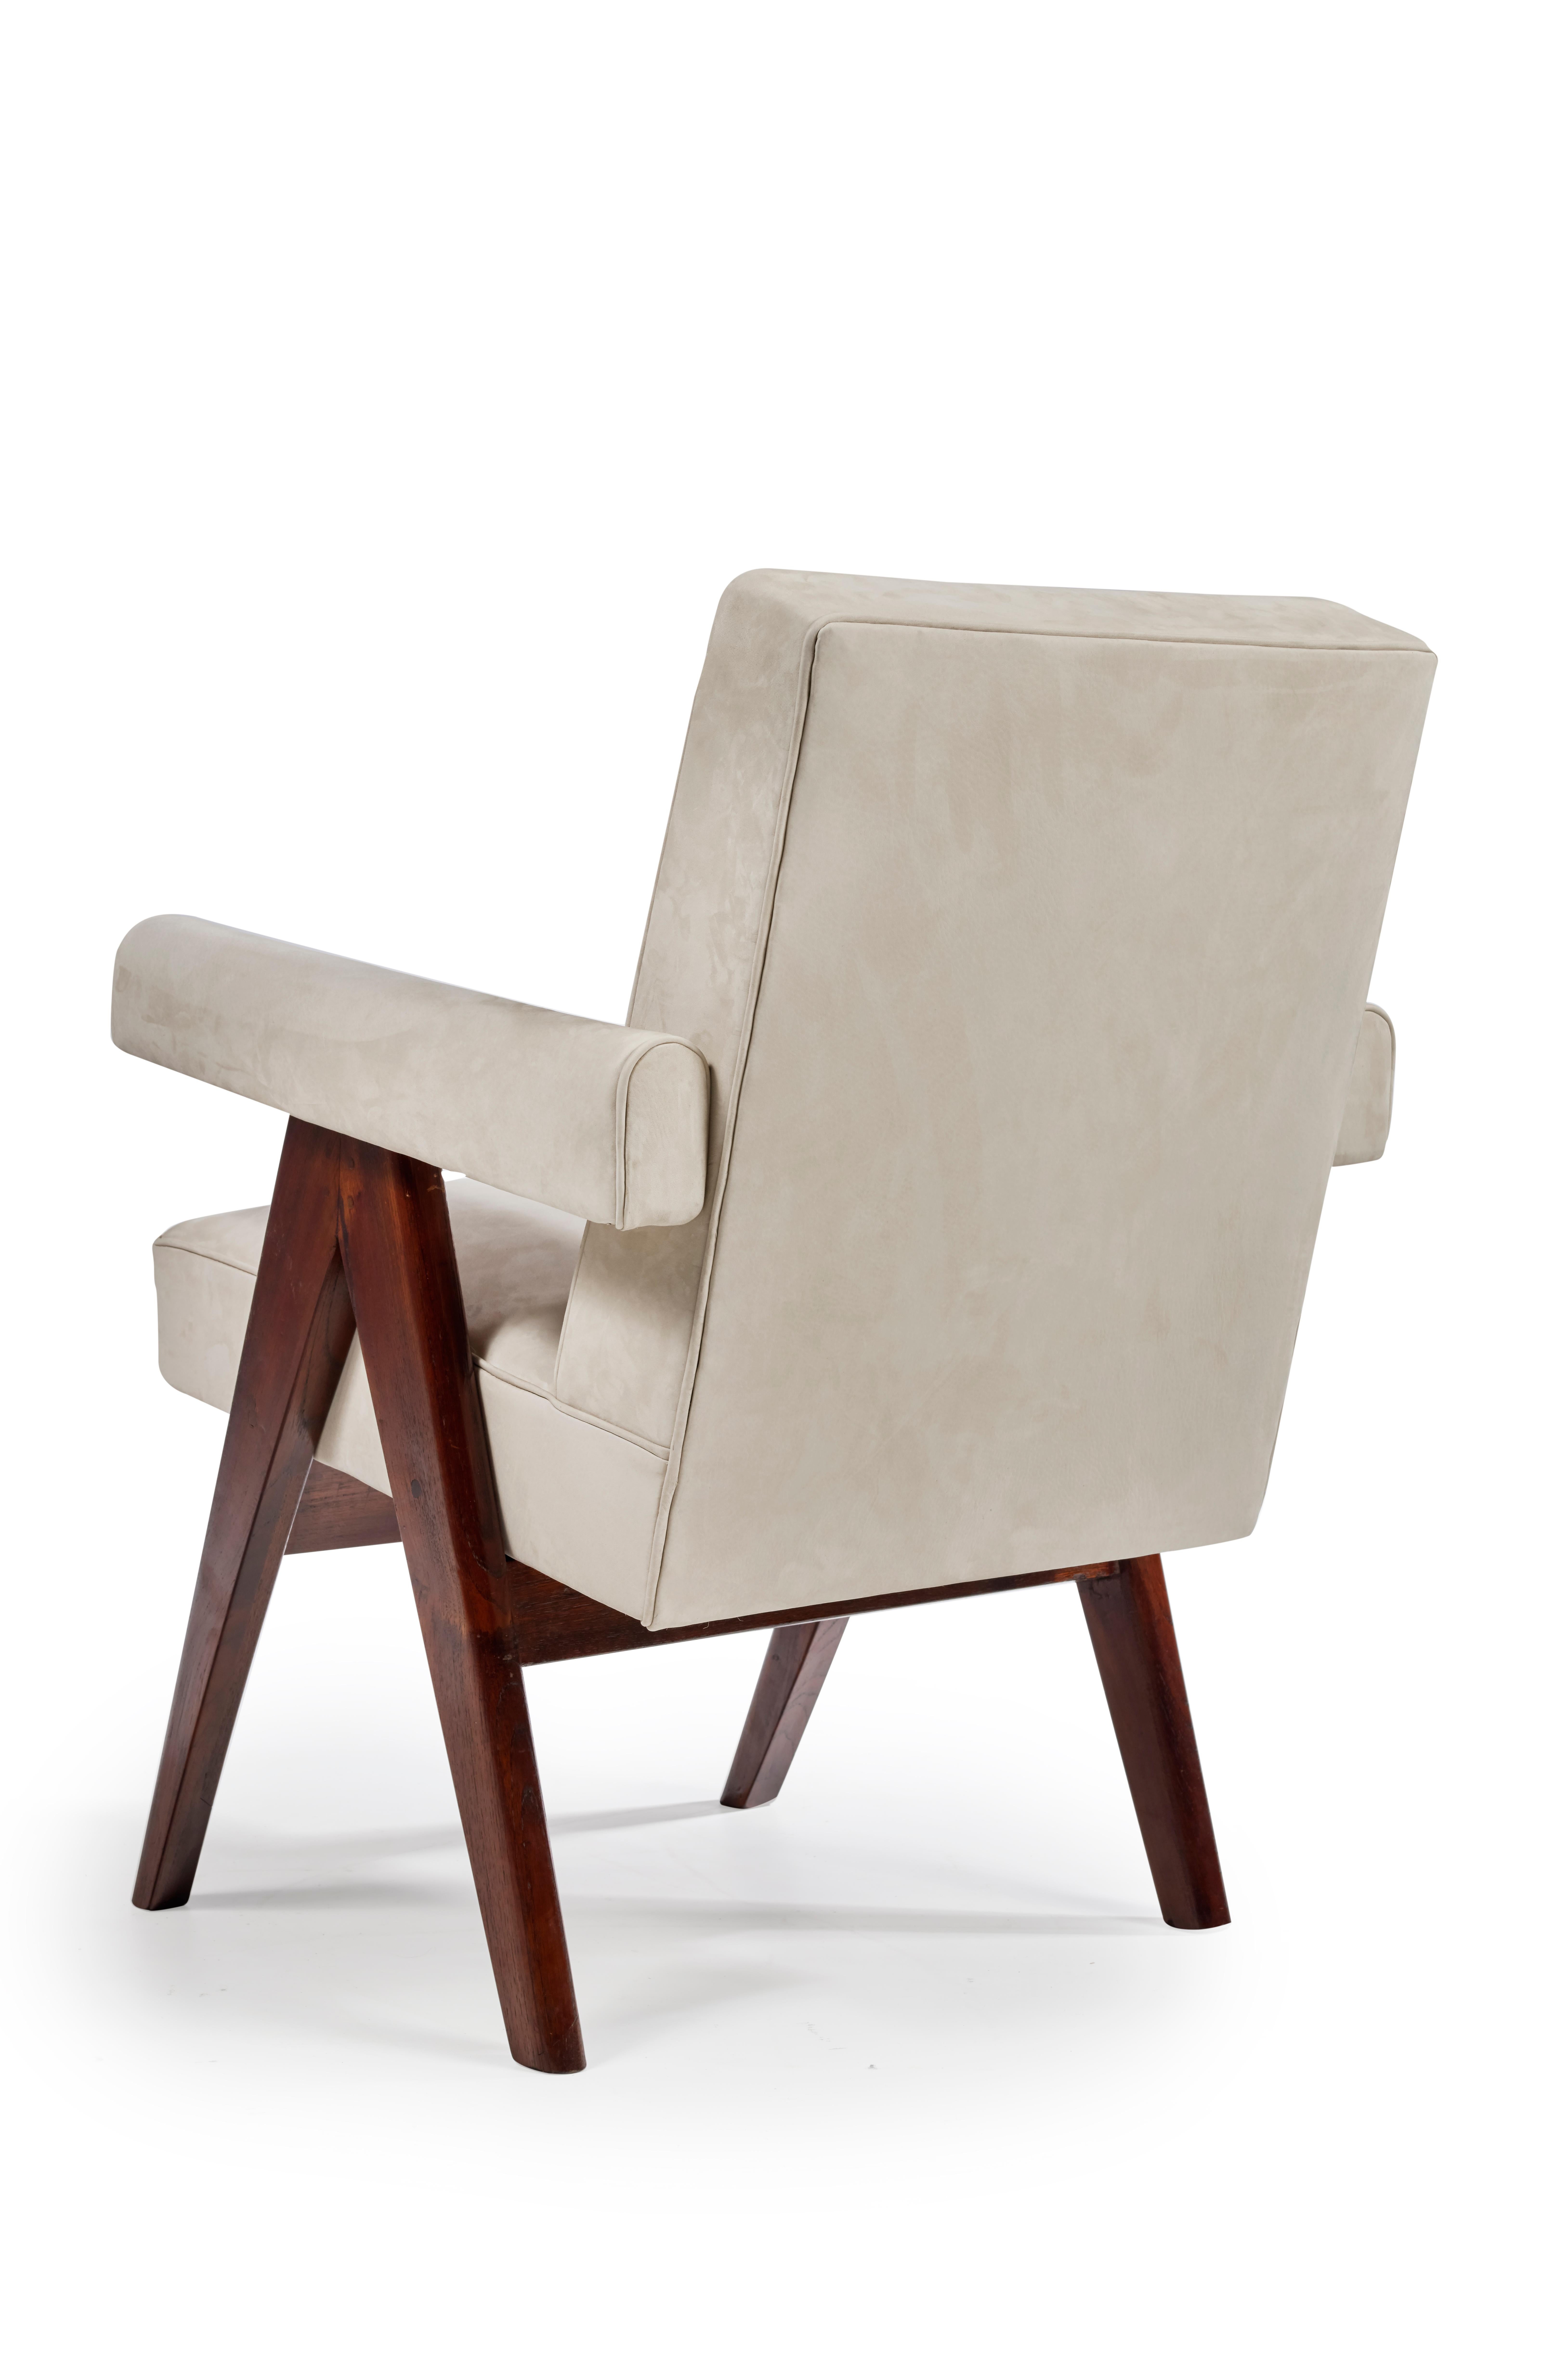 Mid-20th Century Pierre Jeanneret, PJ-SI-30-D, Committee Armchair, Chandigarh, circa 1955